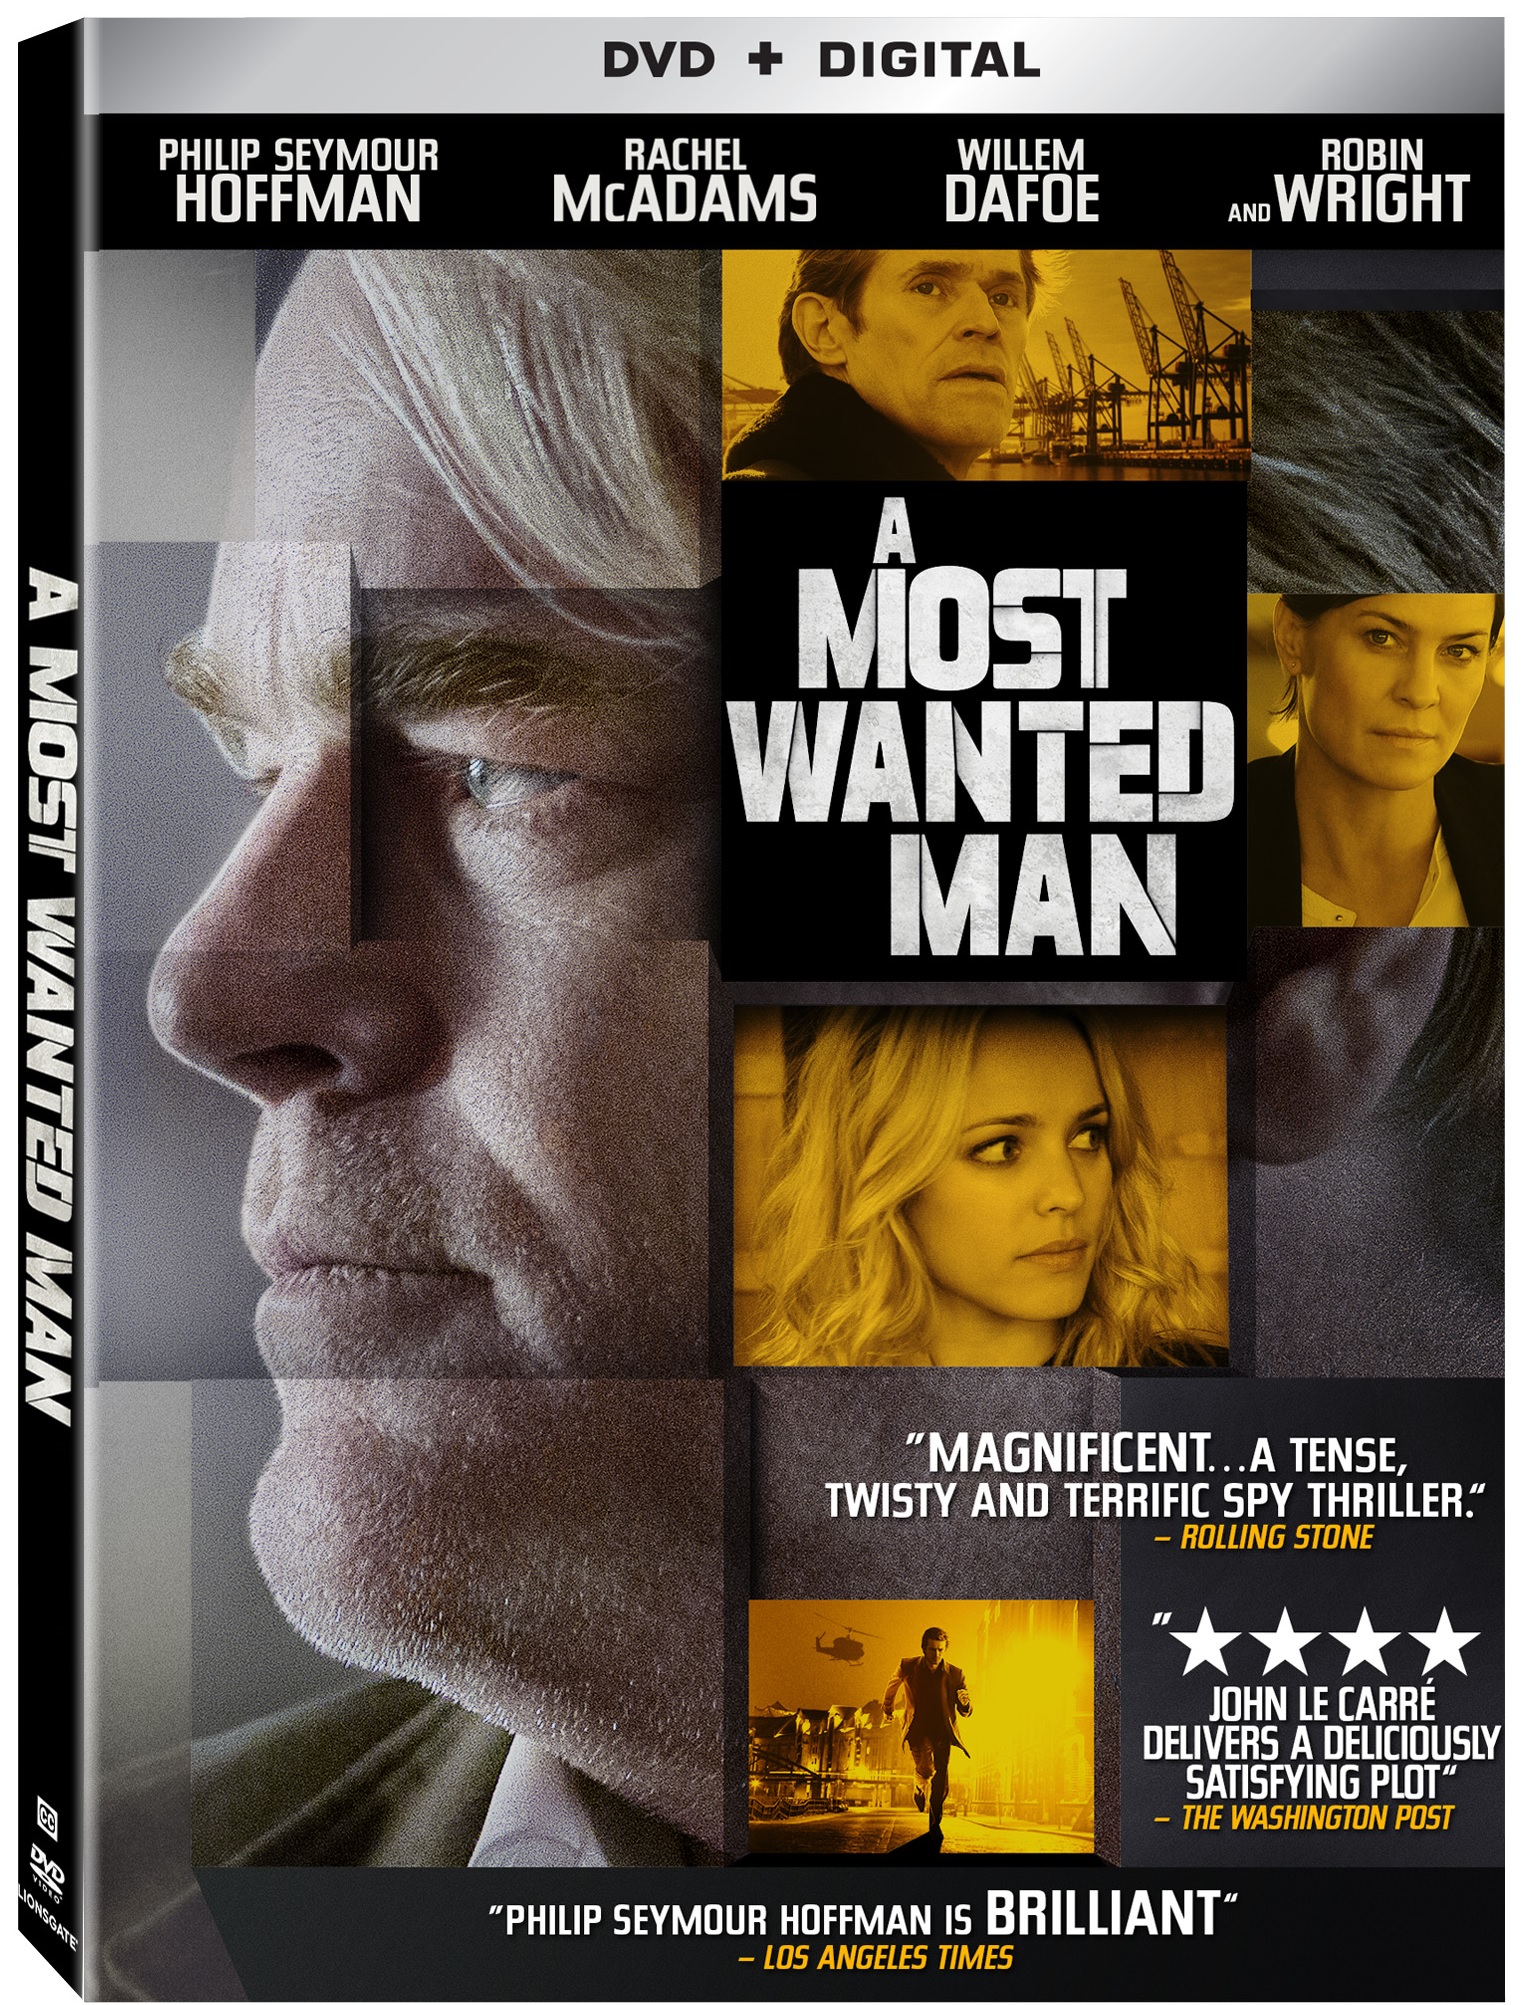 A Most Wanted Man DVD Review